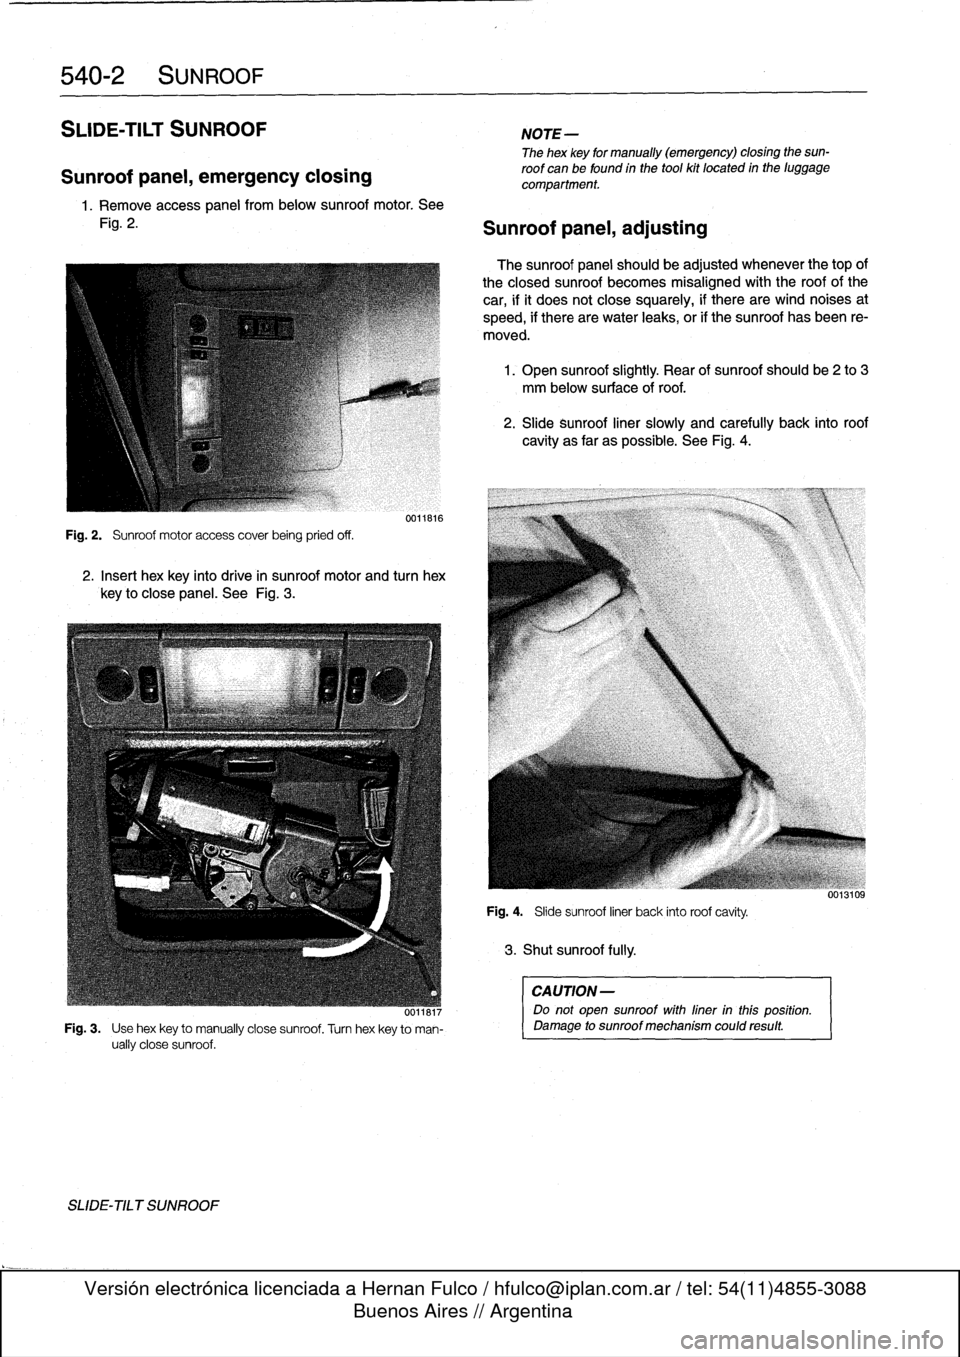 BMW 318i 1994 E36 Workshop Manual 
540-2
SUNROOF

SLIDE-TILT
SUNROOF

Sunroof
panel,
emergency
closing

1.
Remove
access
panel
frombelow
sunroof
motor
.
See

Fig
.
2
.

Fig
.
2
.

	

Sunroof
motor
access
coverbeing
pried
off
.

001181